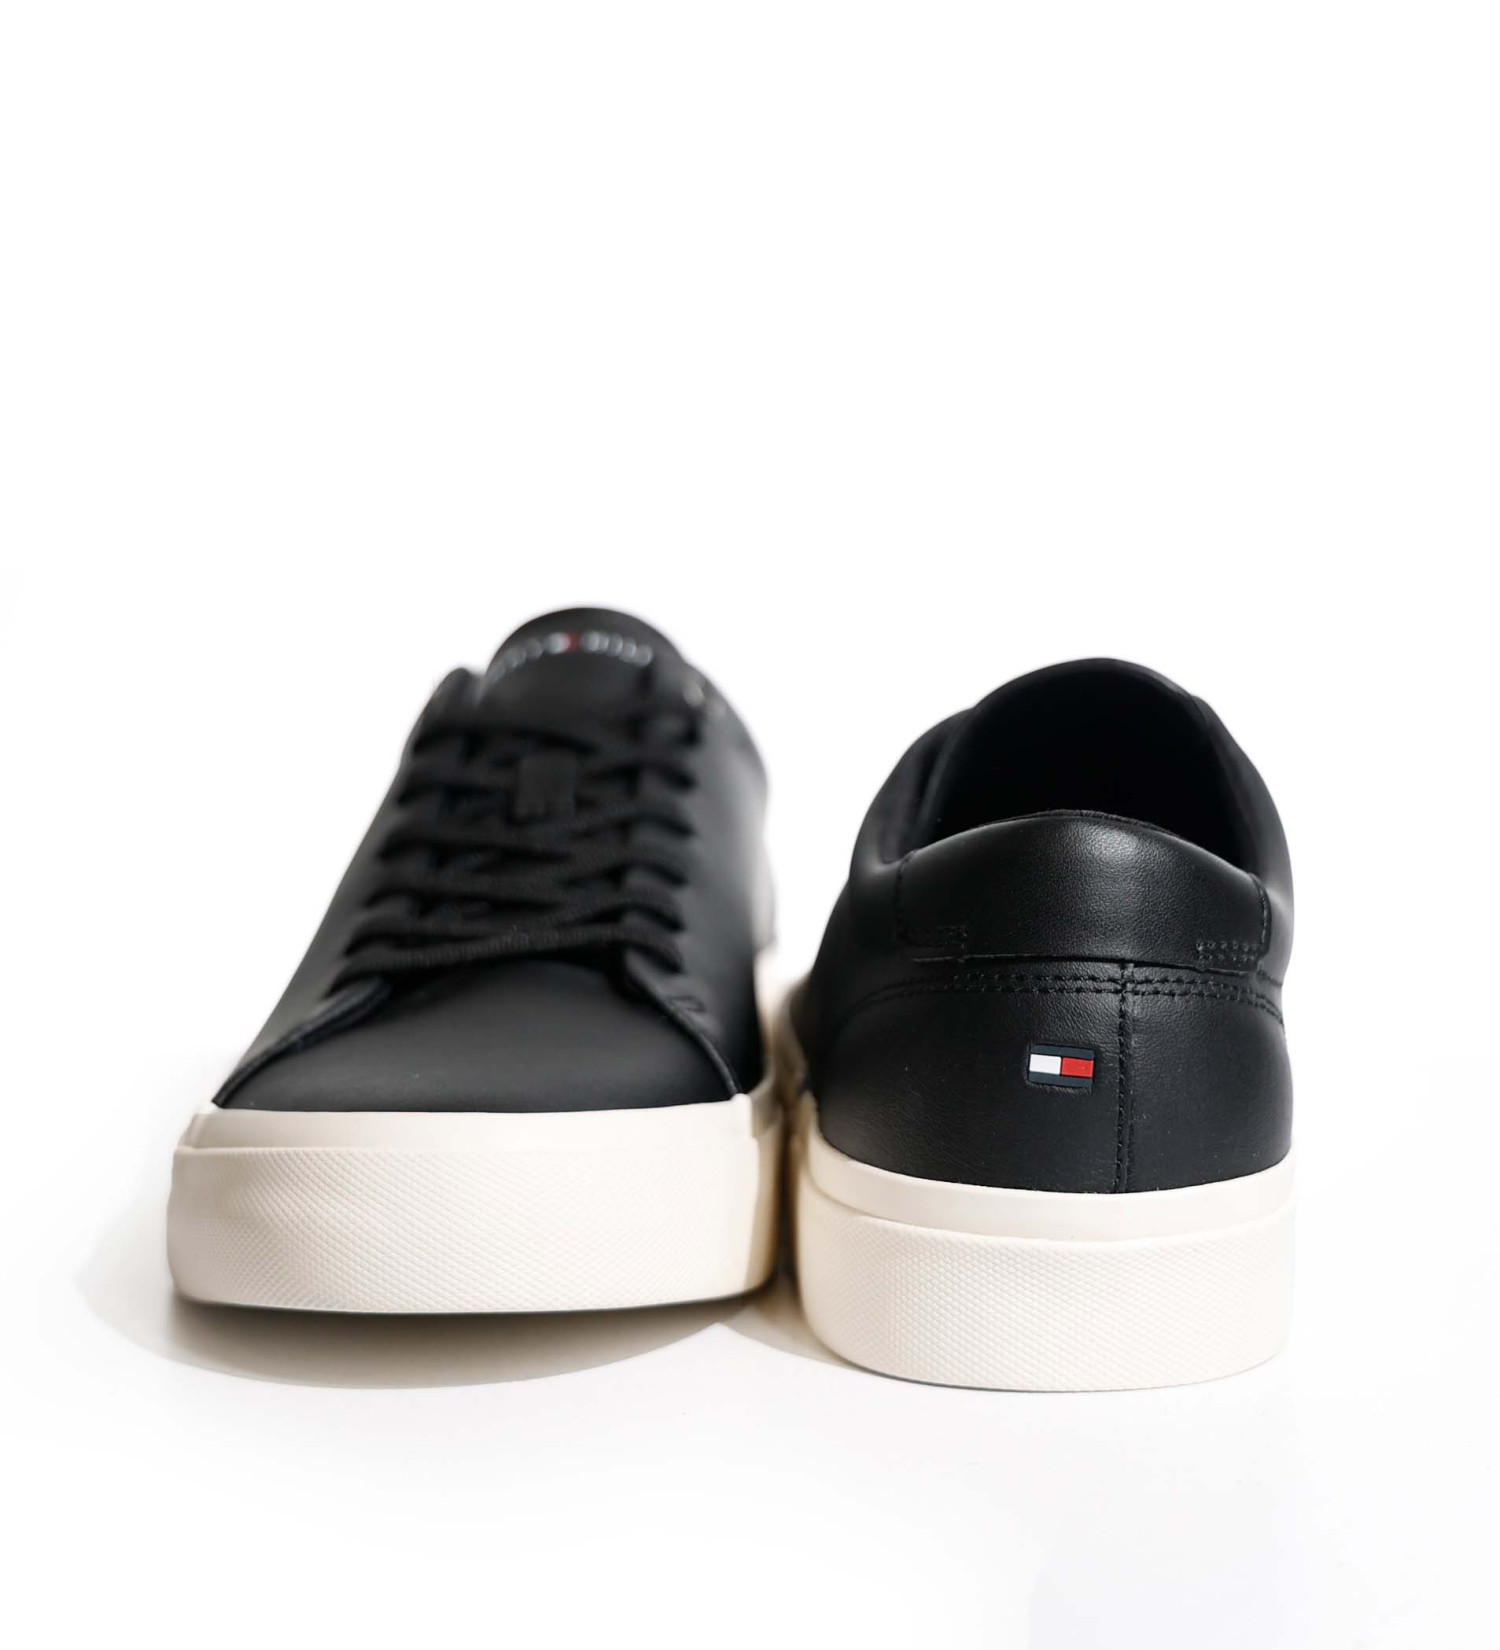 Tommy Hilfiger - CORPORATE LEATHER DETAIL VULC Size 40